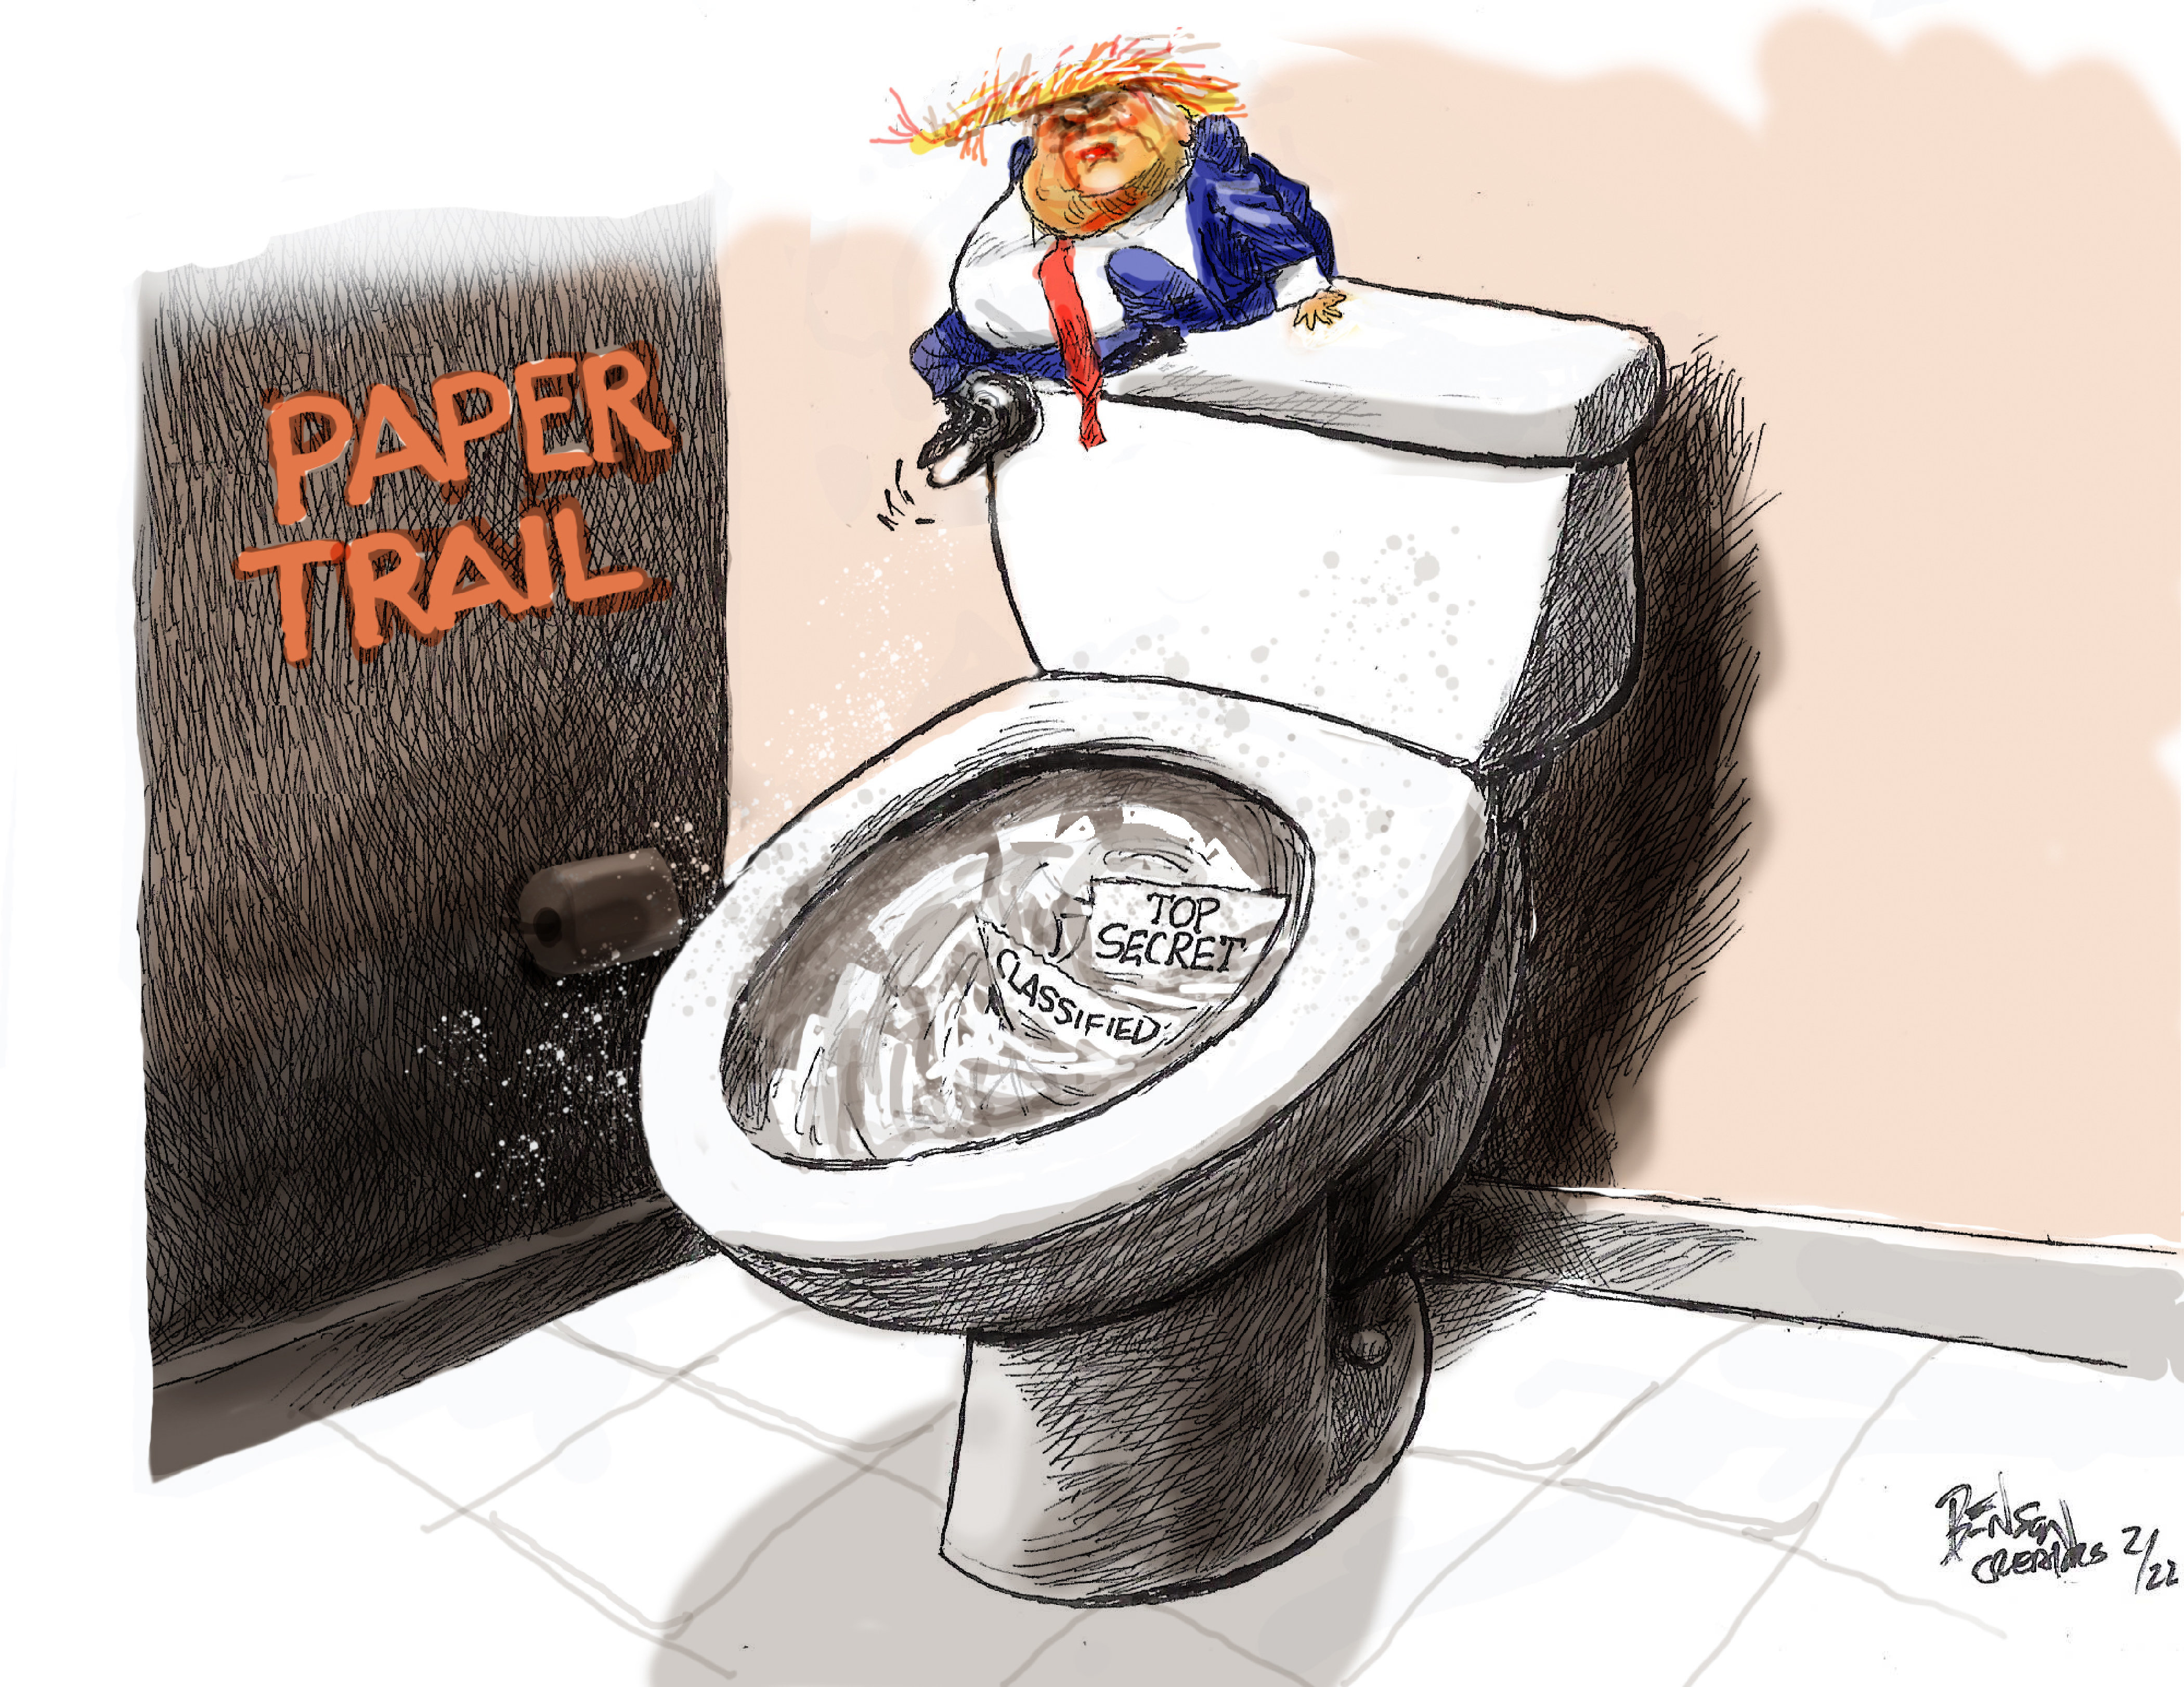 5 scathing cartoons about Trump's toilet troubles | The Week